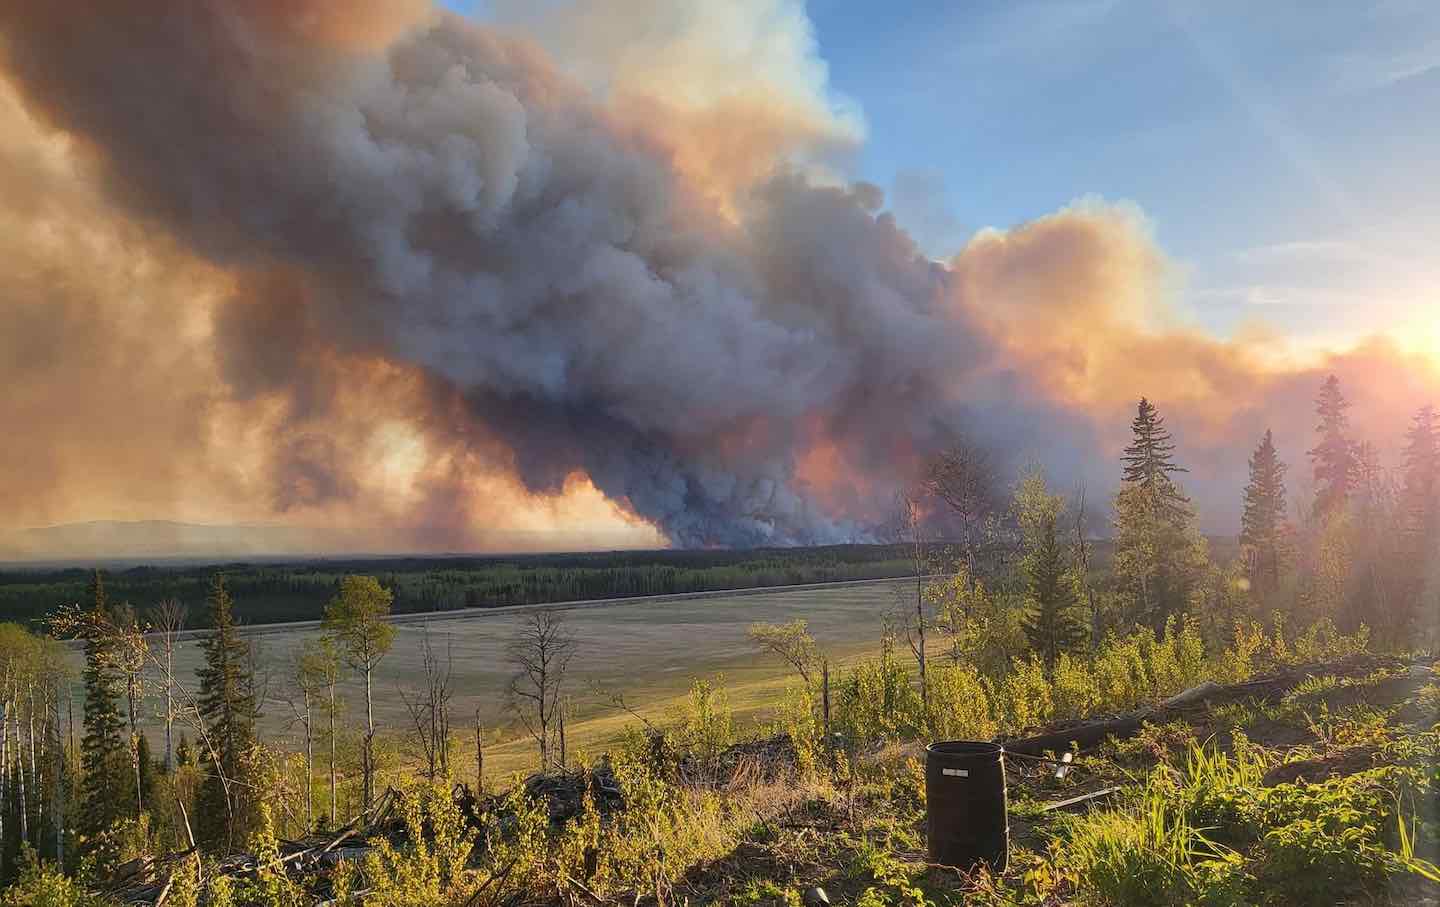 The Canadian Wildfires Are Once Again Sounding the Alarm About What’s to Come